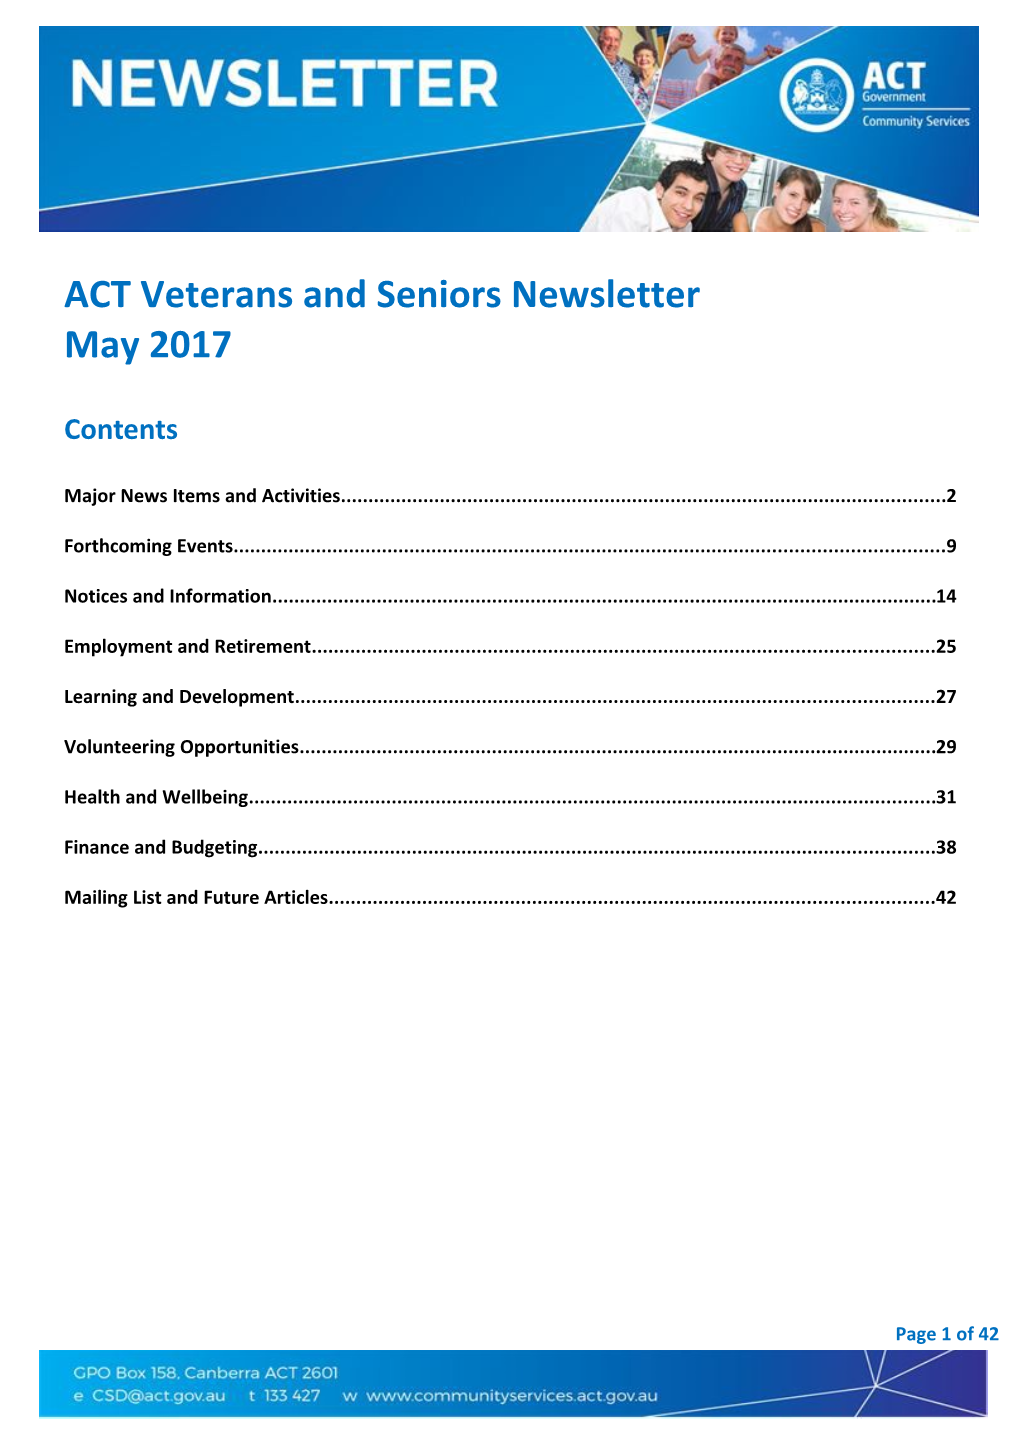 ACT Veterans and Seniors Newsletter May 2017